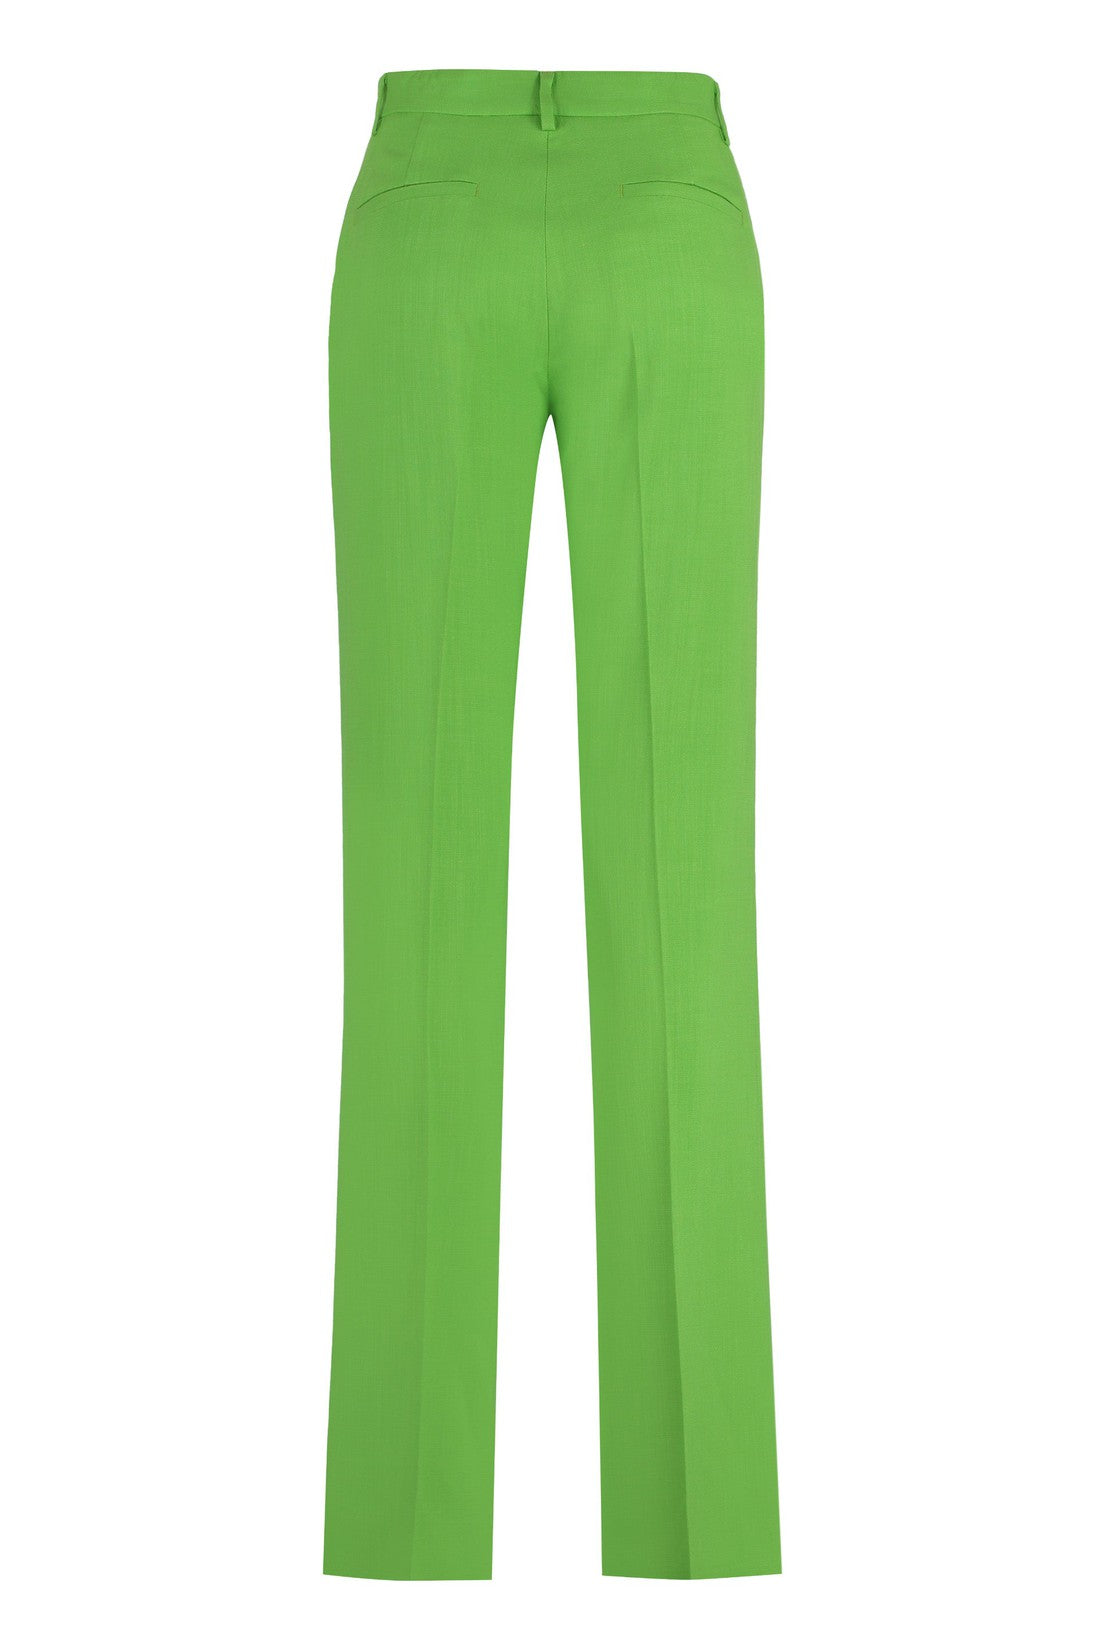 MSGM-OUTLET-SALE-Flared viscose trousers-ARCHIVIST